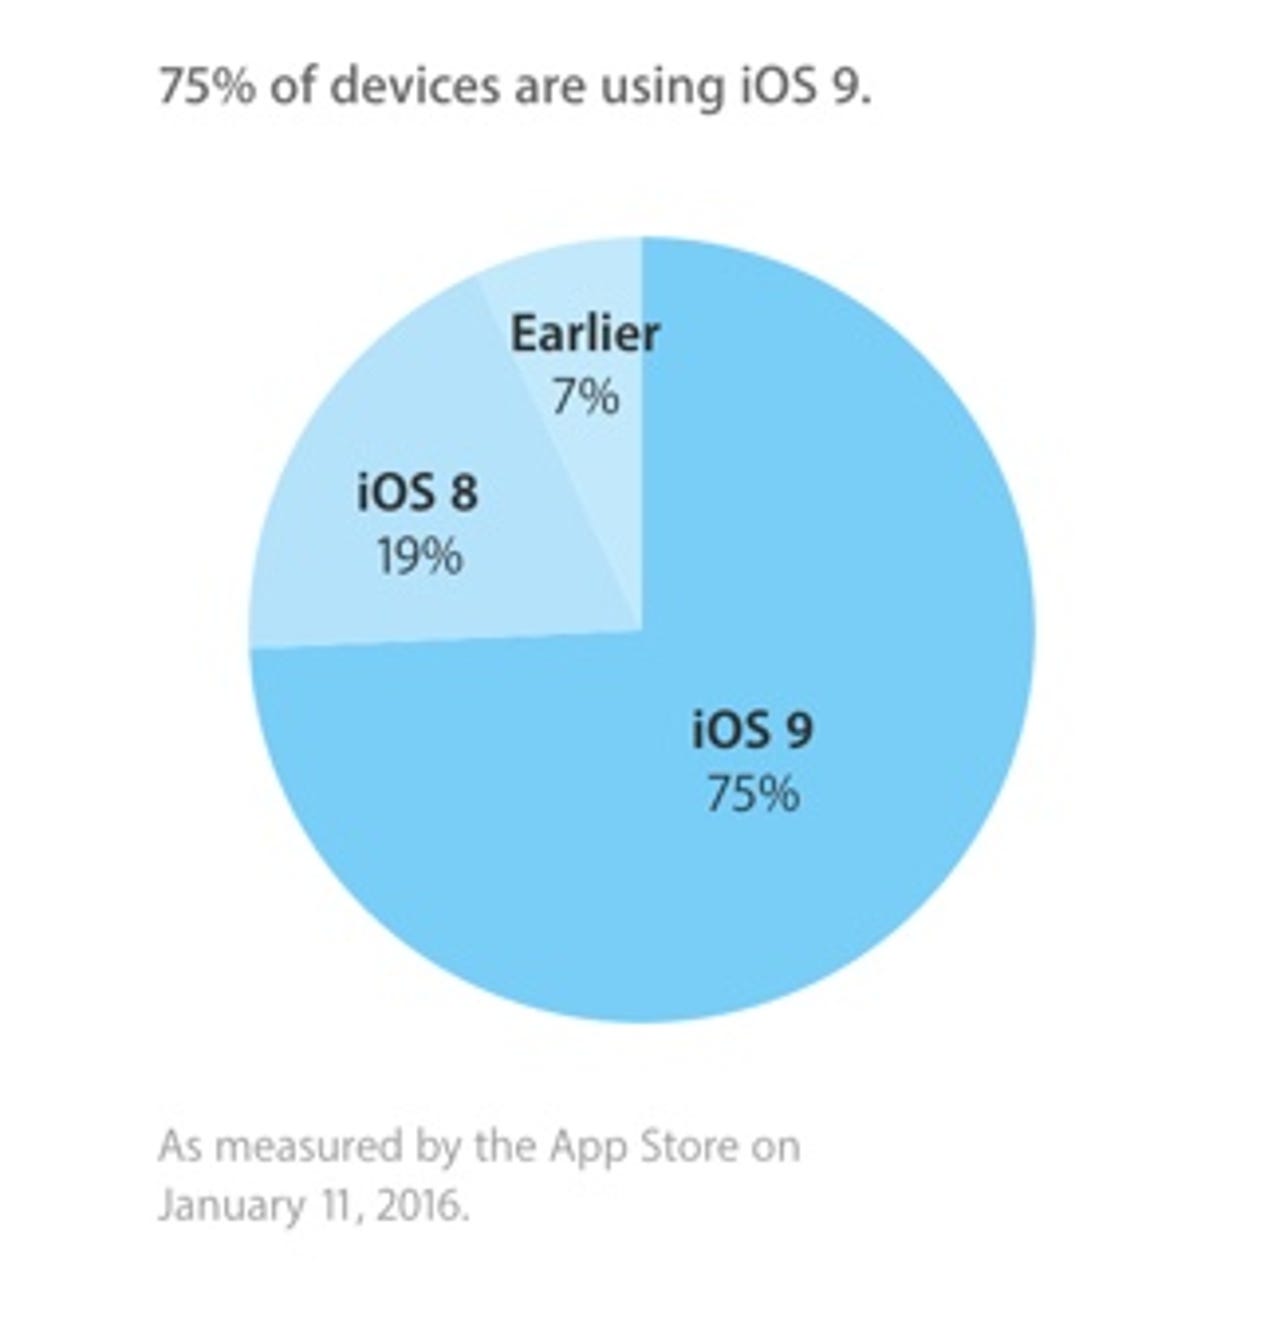 Three-quarters of iDevices now running iOS 9